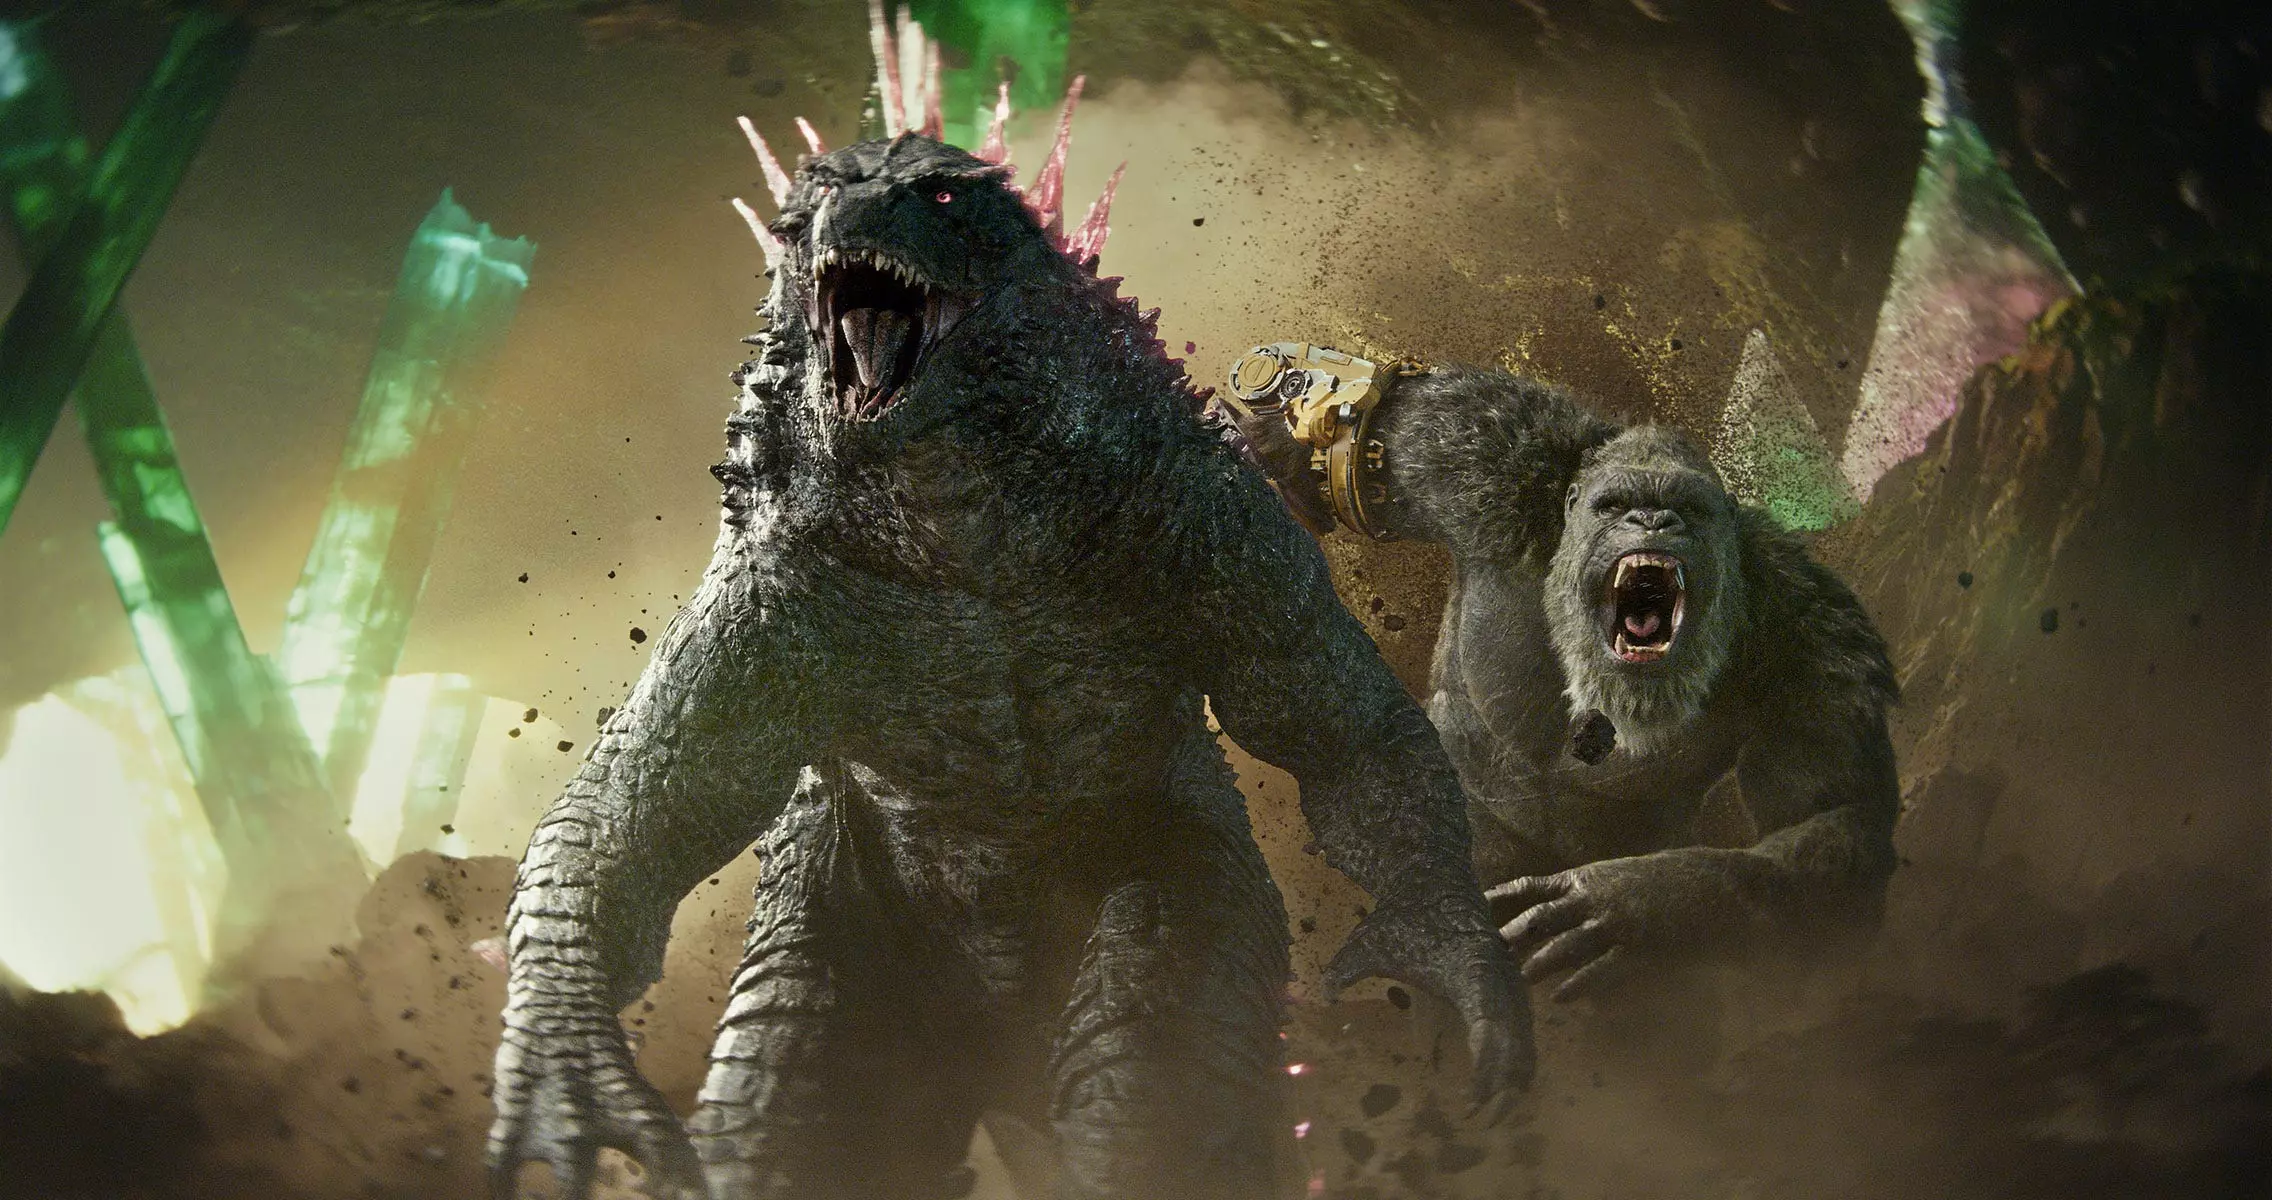 Godzilla and King Kong join forces to take down a fearsome foe in the monster movie "Godzilla x Kong: The New Empire."